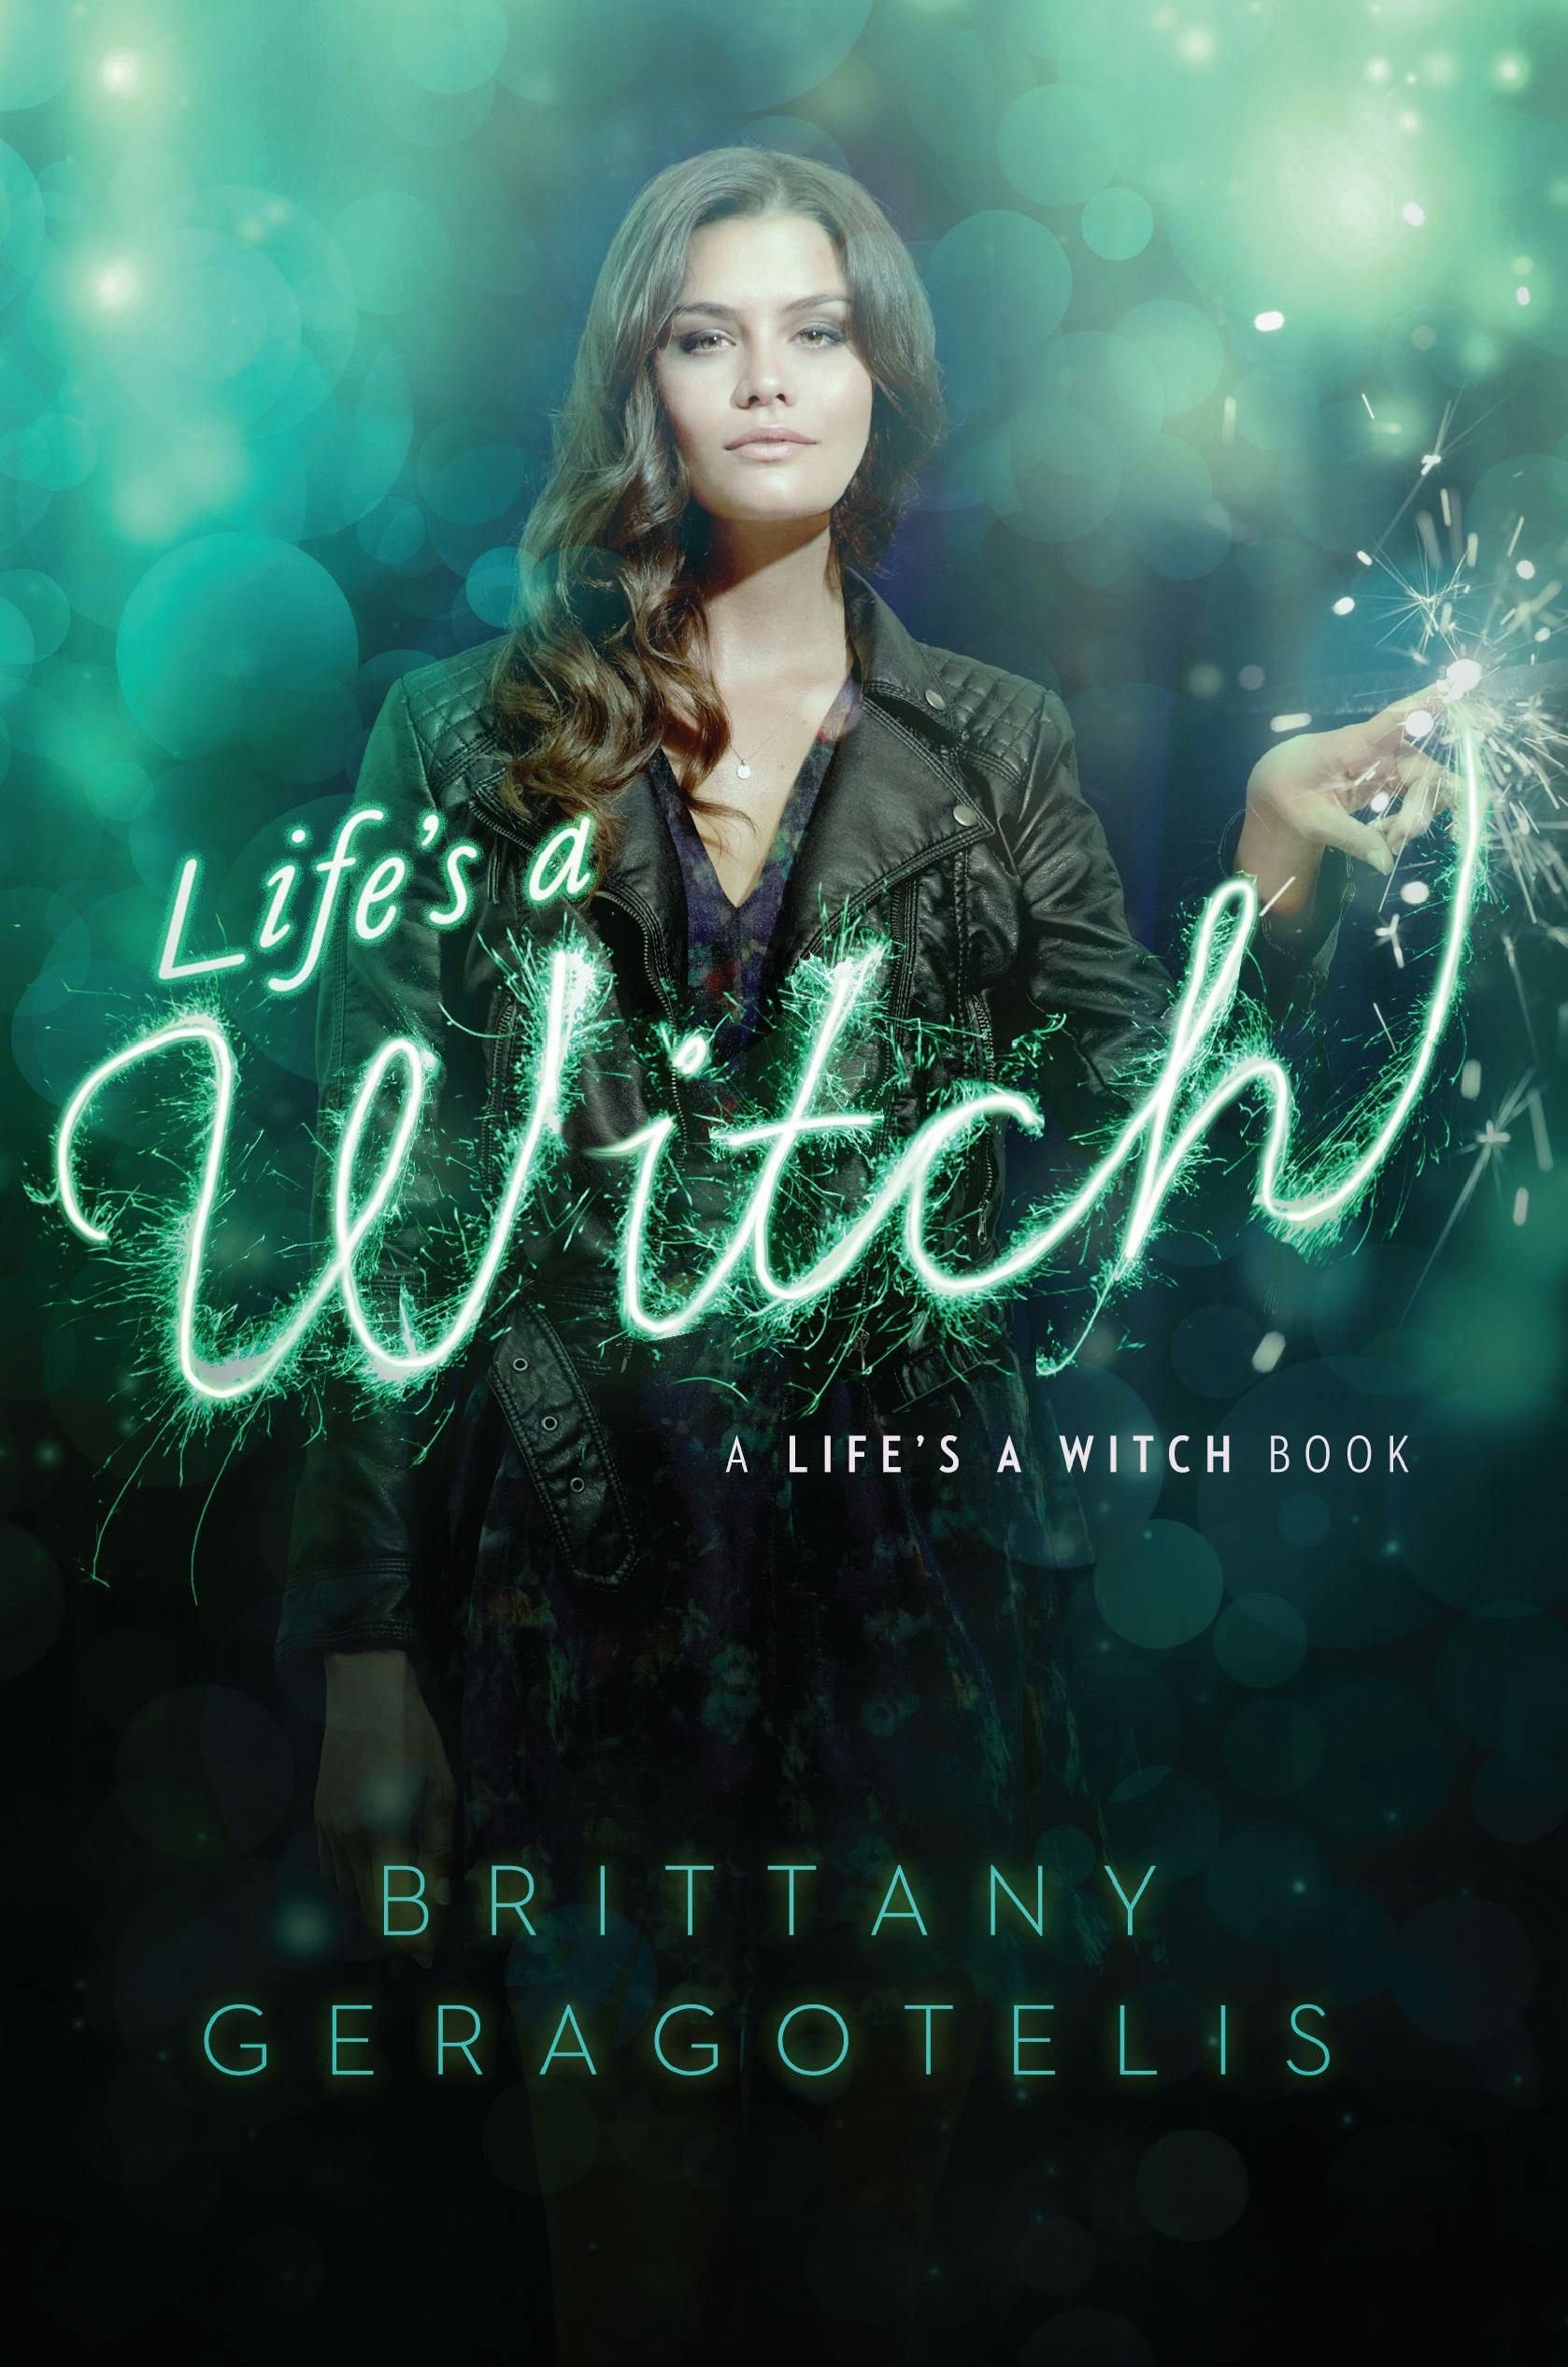 Life's a Witch - Brittany Geragotelis